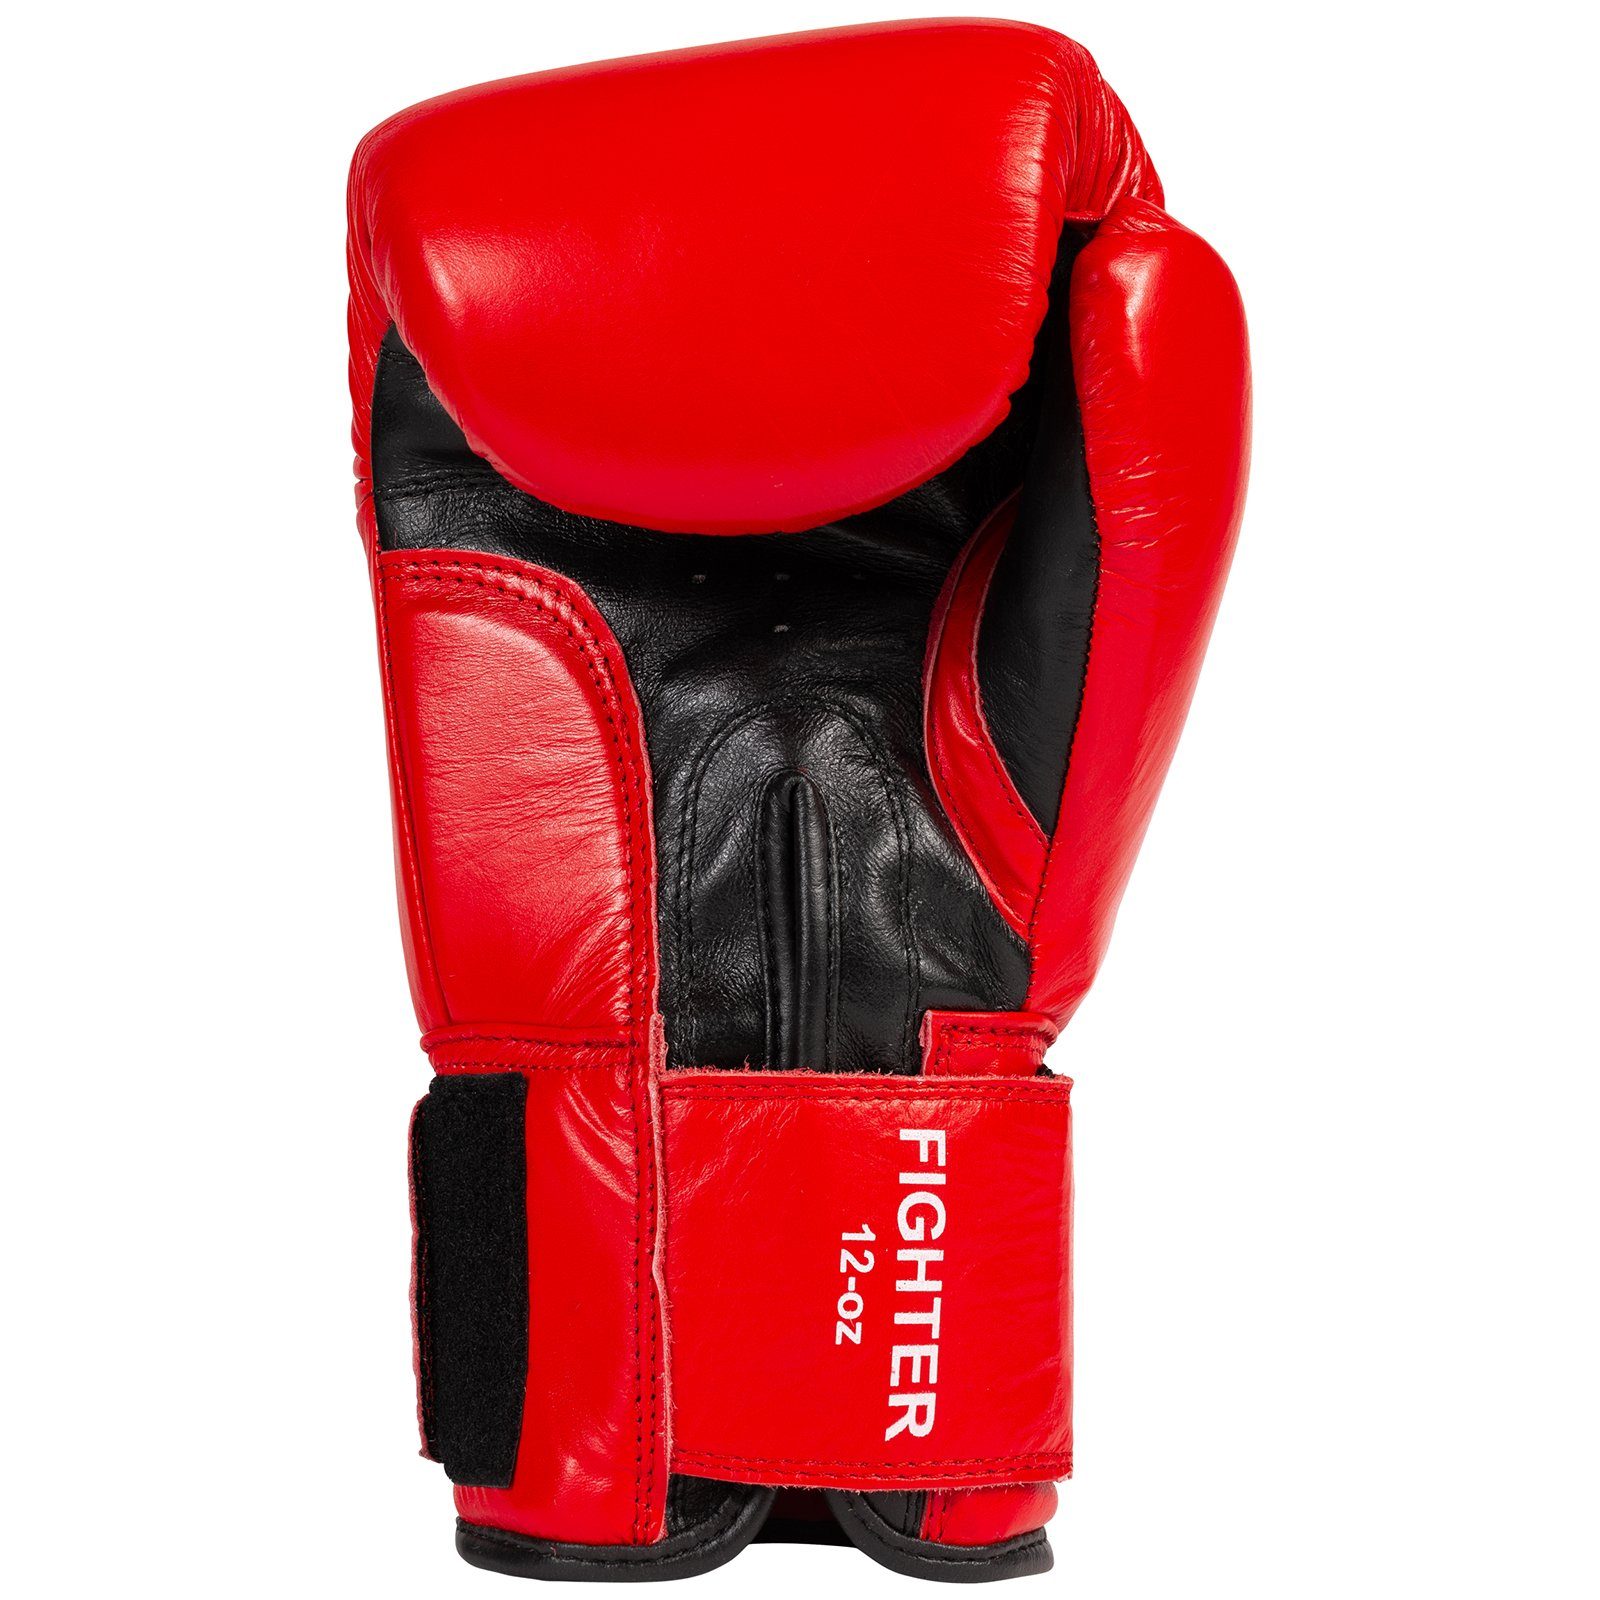 Benlee Rocky Boxhandschuhe FIGHTER Marciano Red/Black